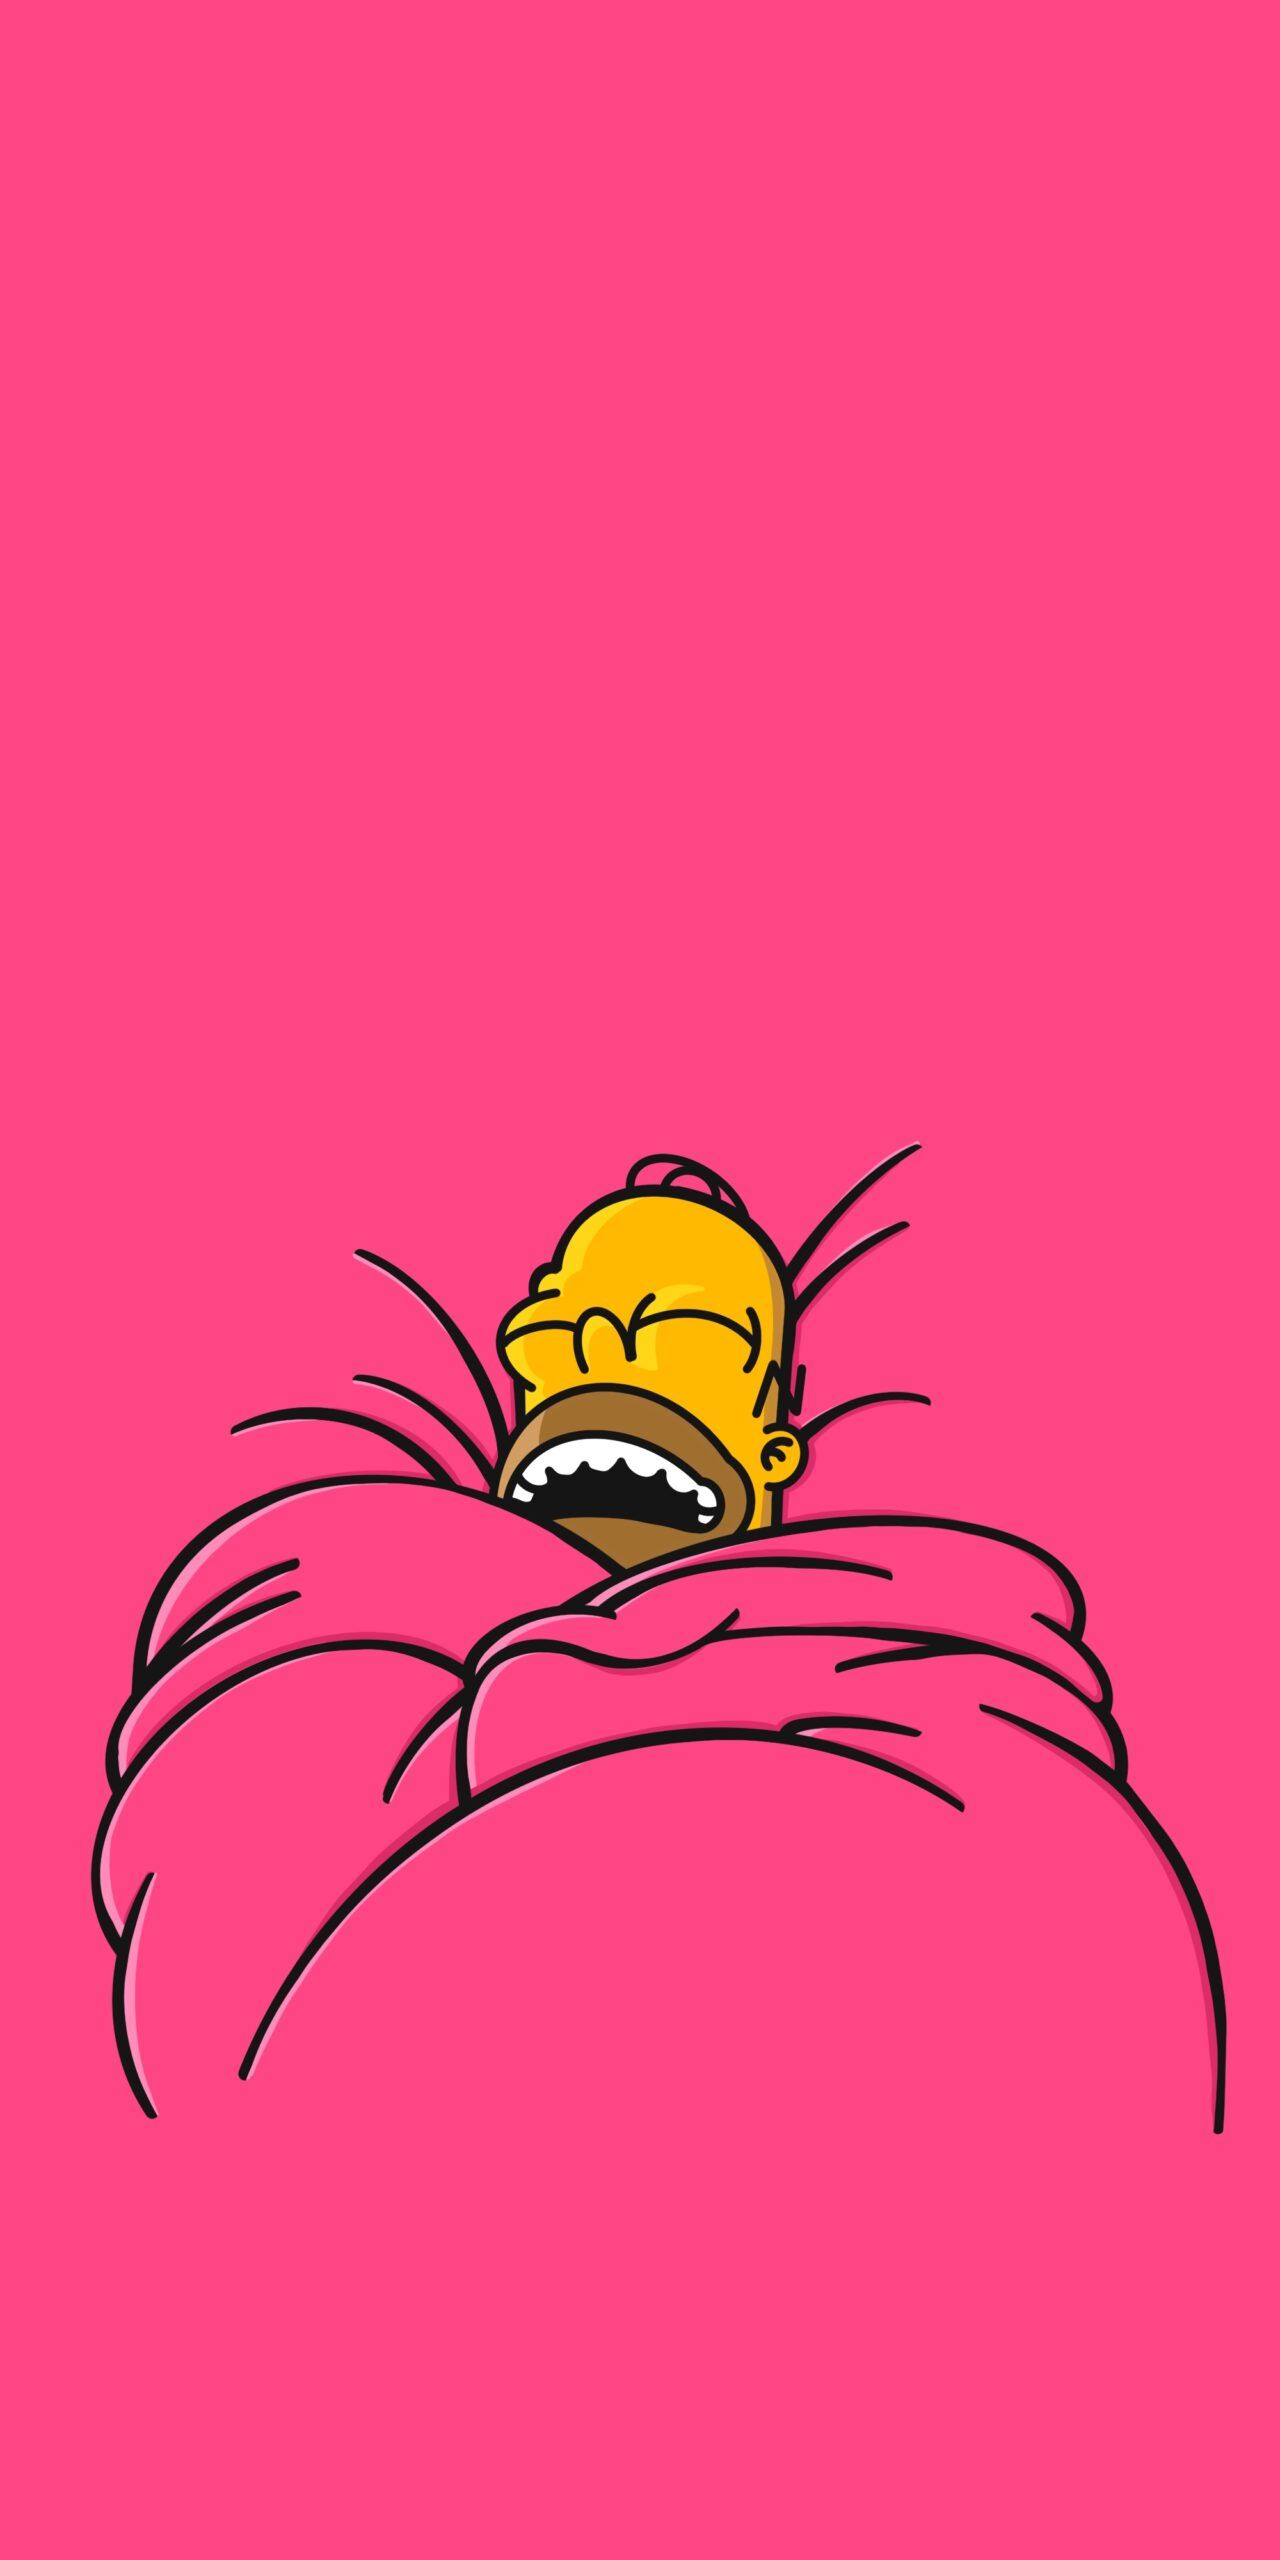 The simpsons hd wallpaper - The Simpsons